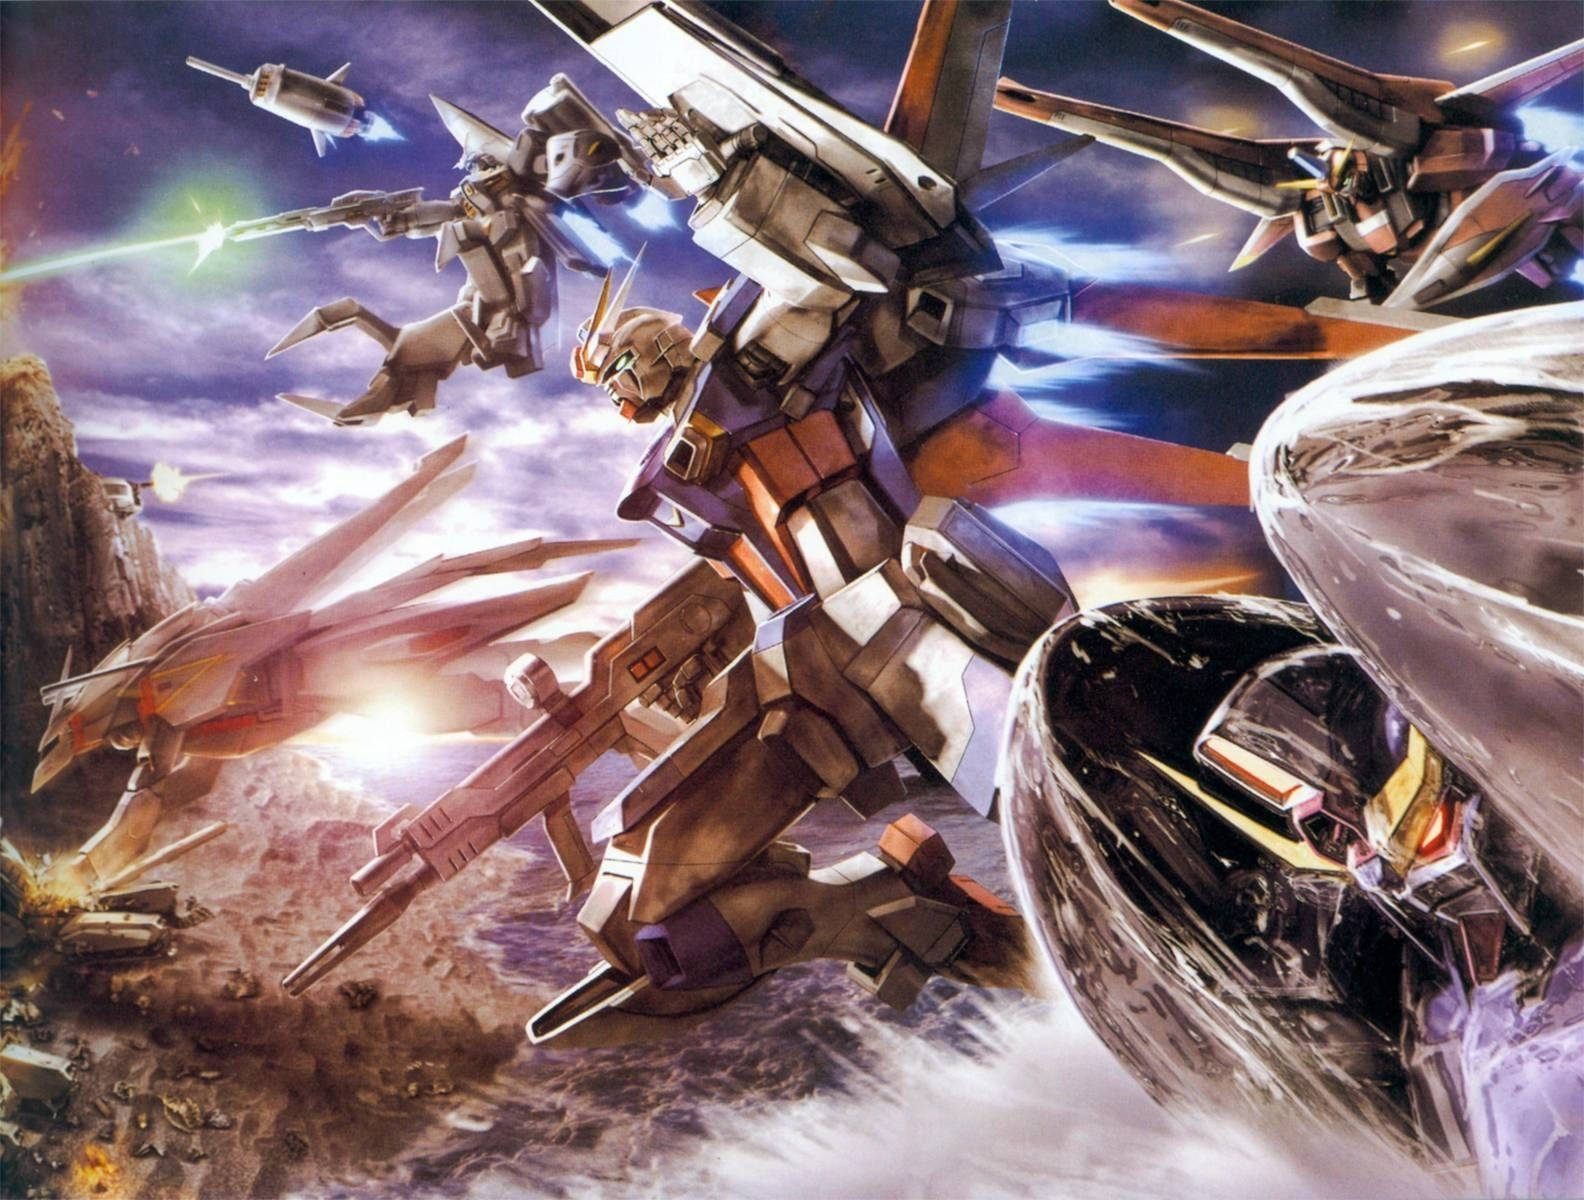 Explore the front lines of advanced warfare with a Gundam mobile suit Wallpaper